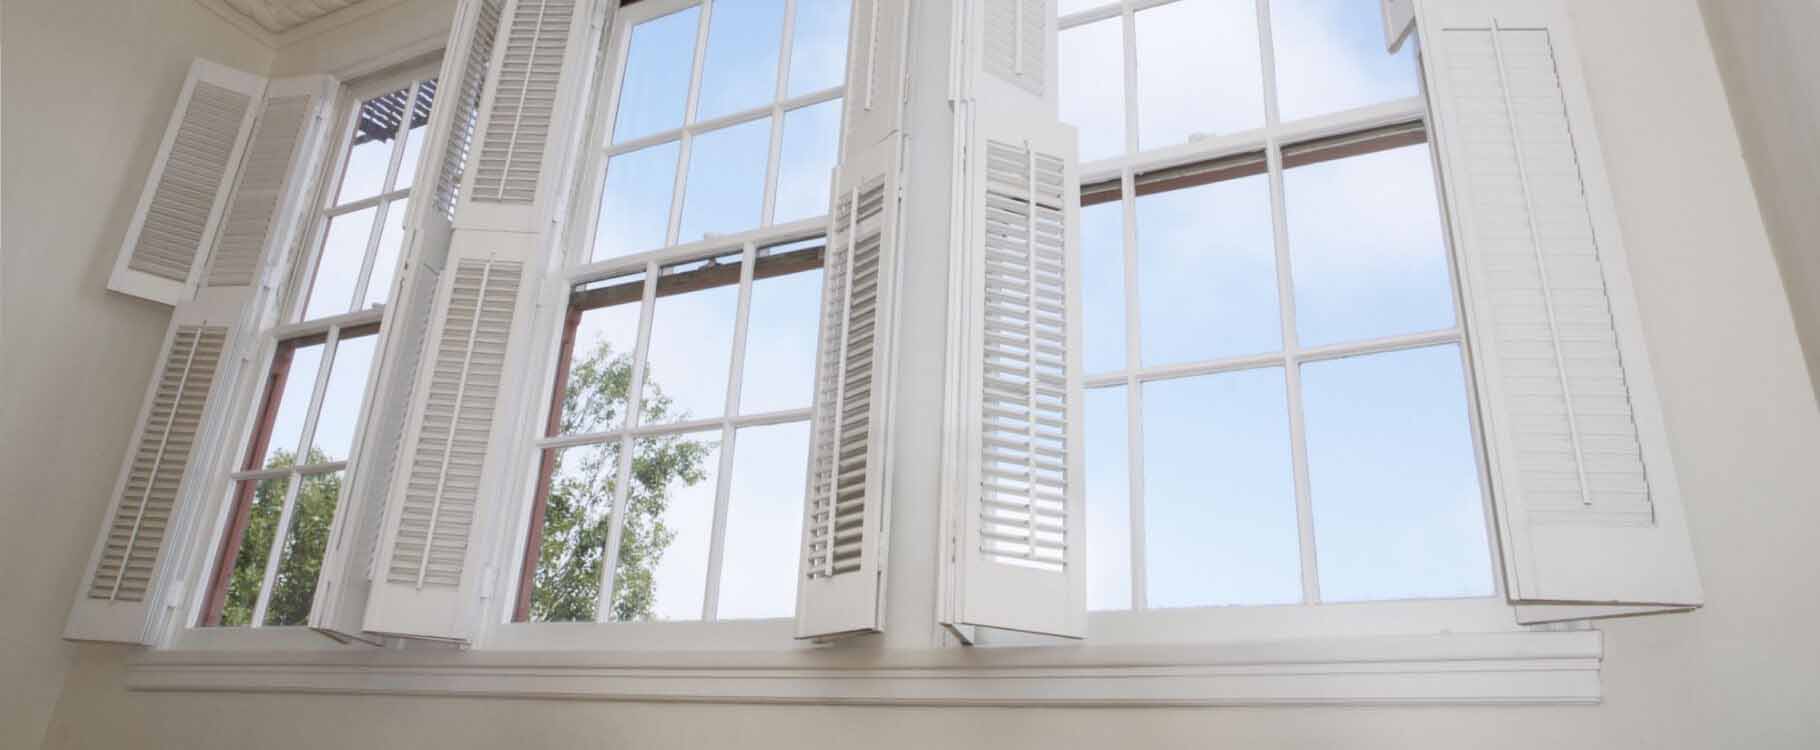 7 Benefits of Plantation Shutters For Bedroom Window